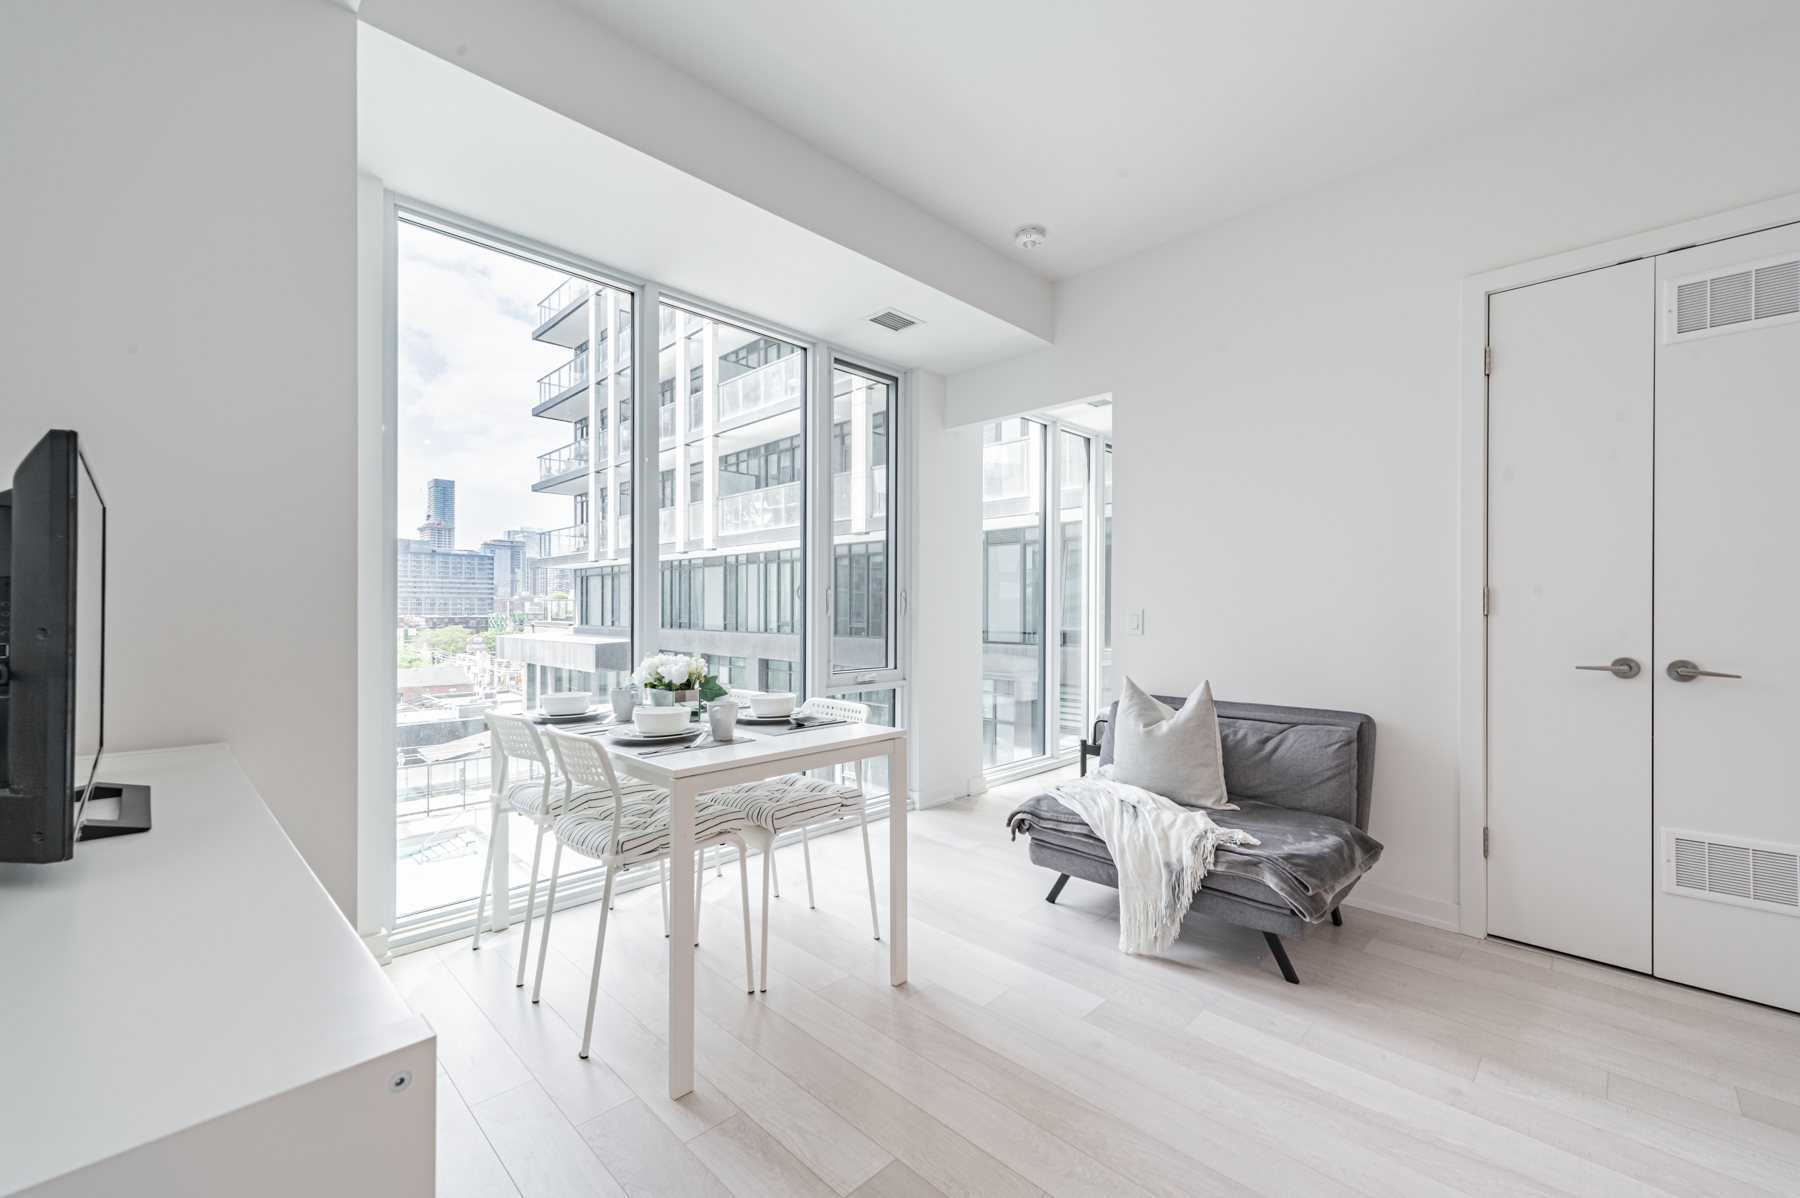 Light coloured laminate floors and gray walls of 50 Power St Unit 618.